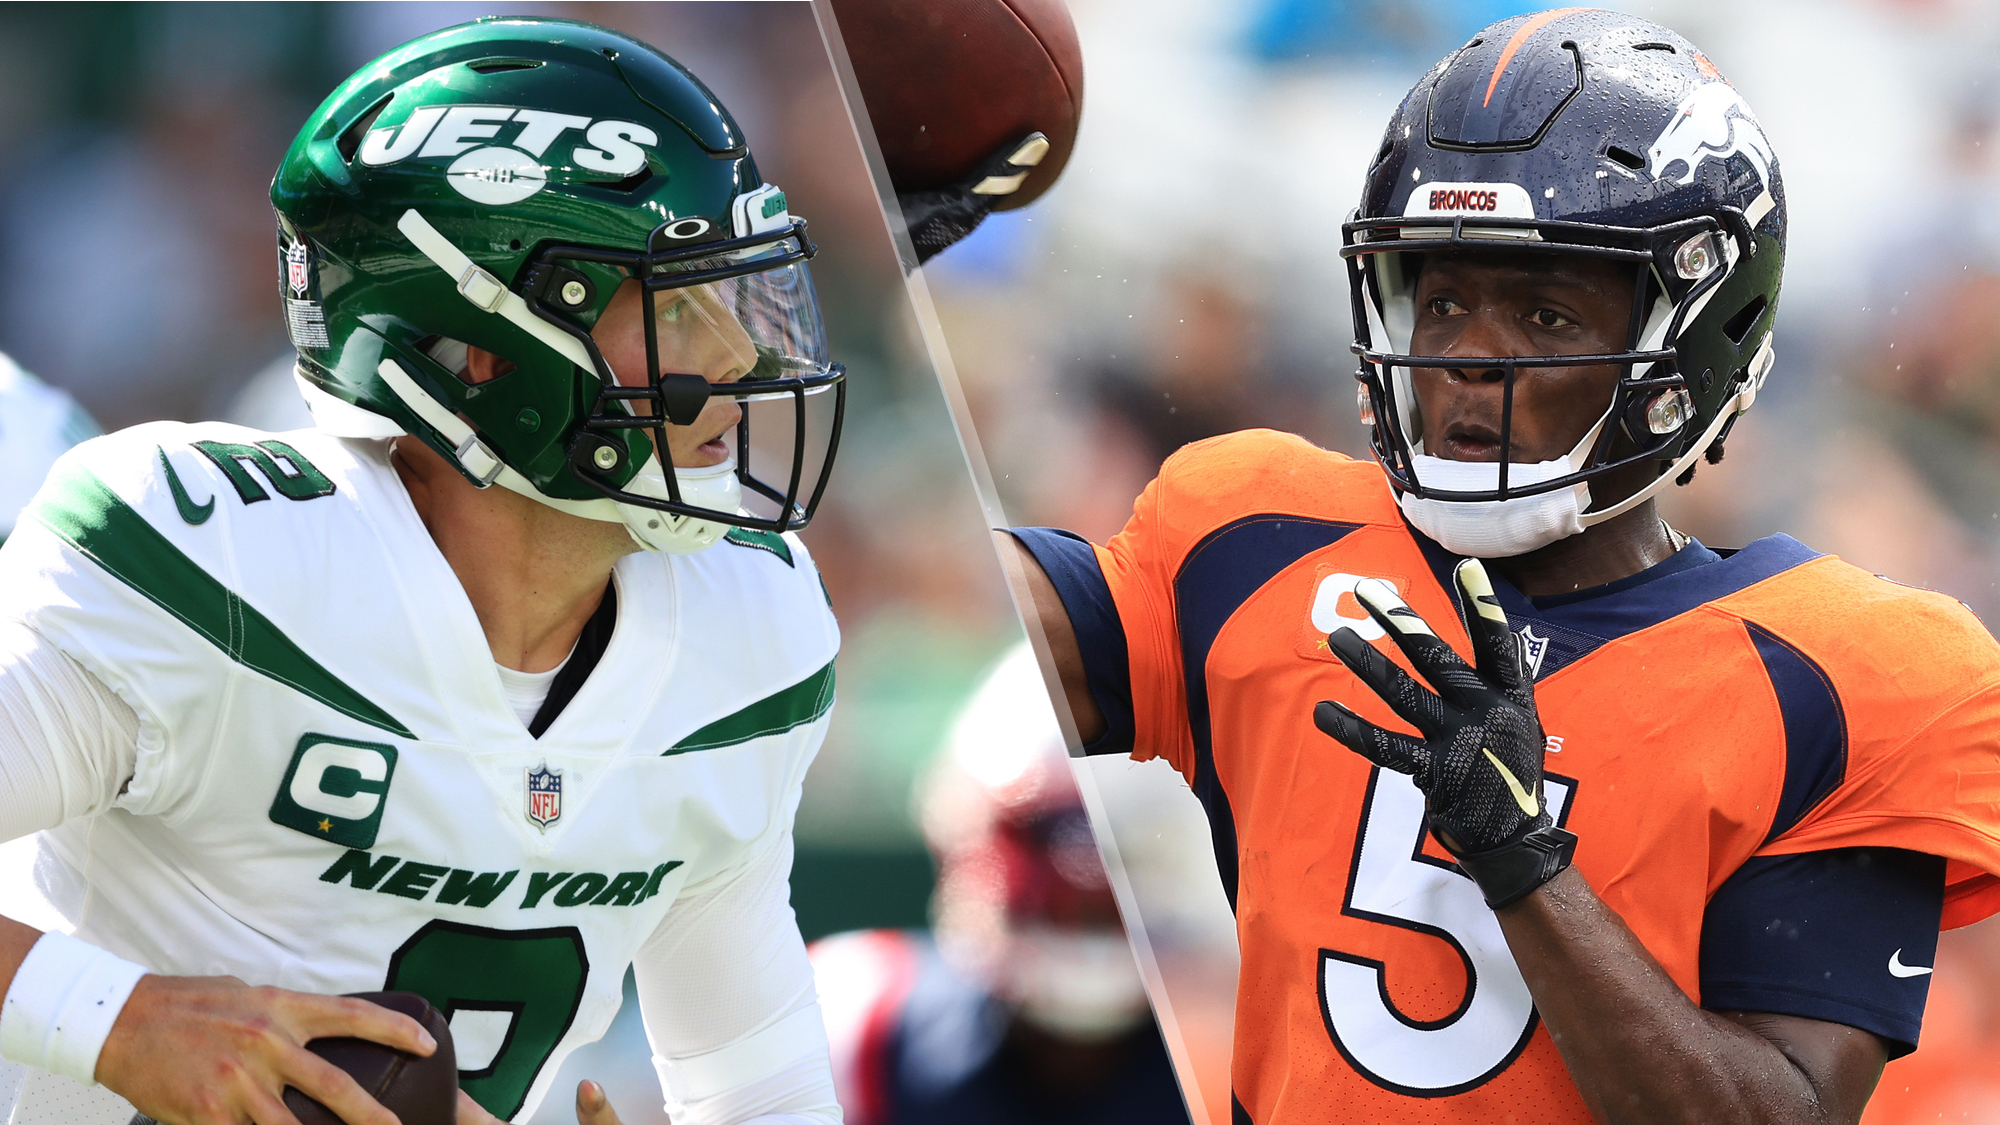 Jets vs Broncos live stream: How to watch NFL week 3 game online